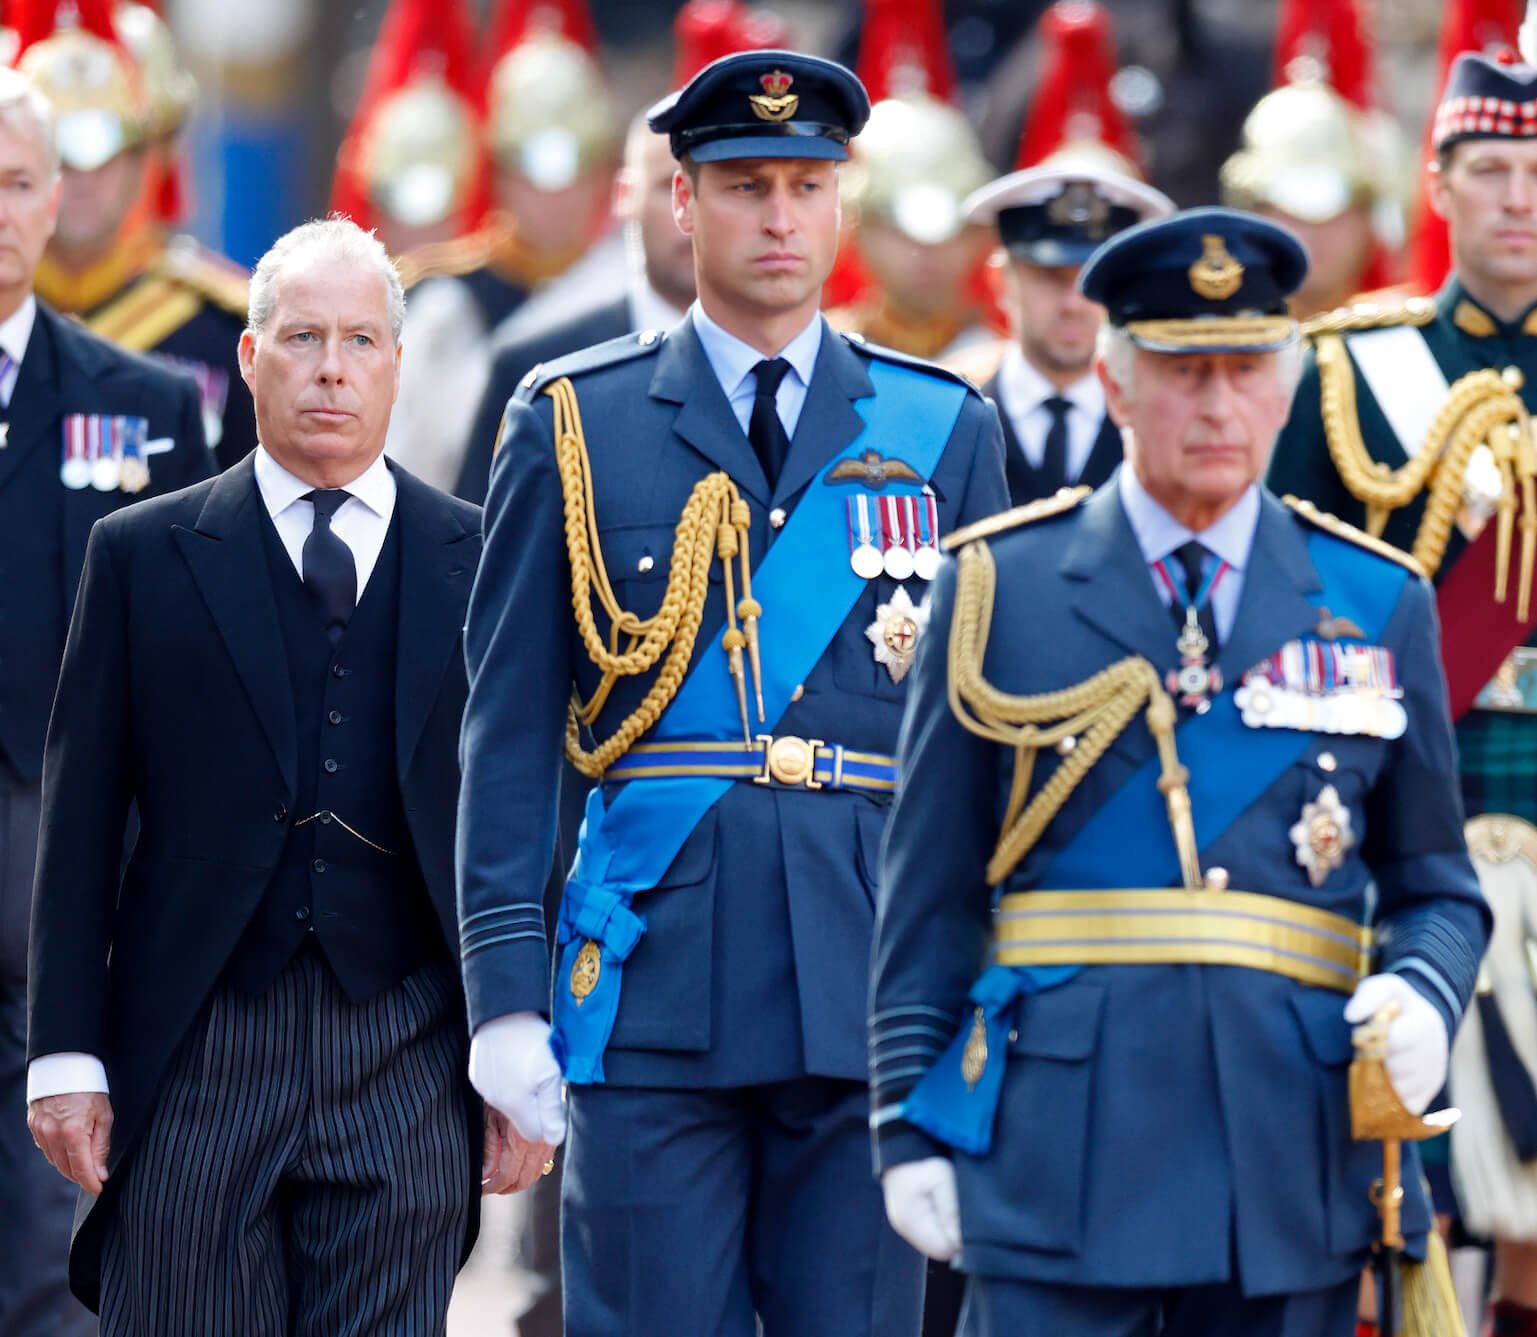 King Charles with Prince William behind him and David Armstrong-Jones, Earl of Snowden, behind both of them. King Charles and Prince William are both in uniform